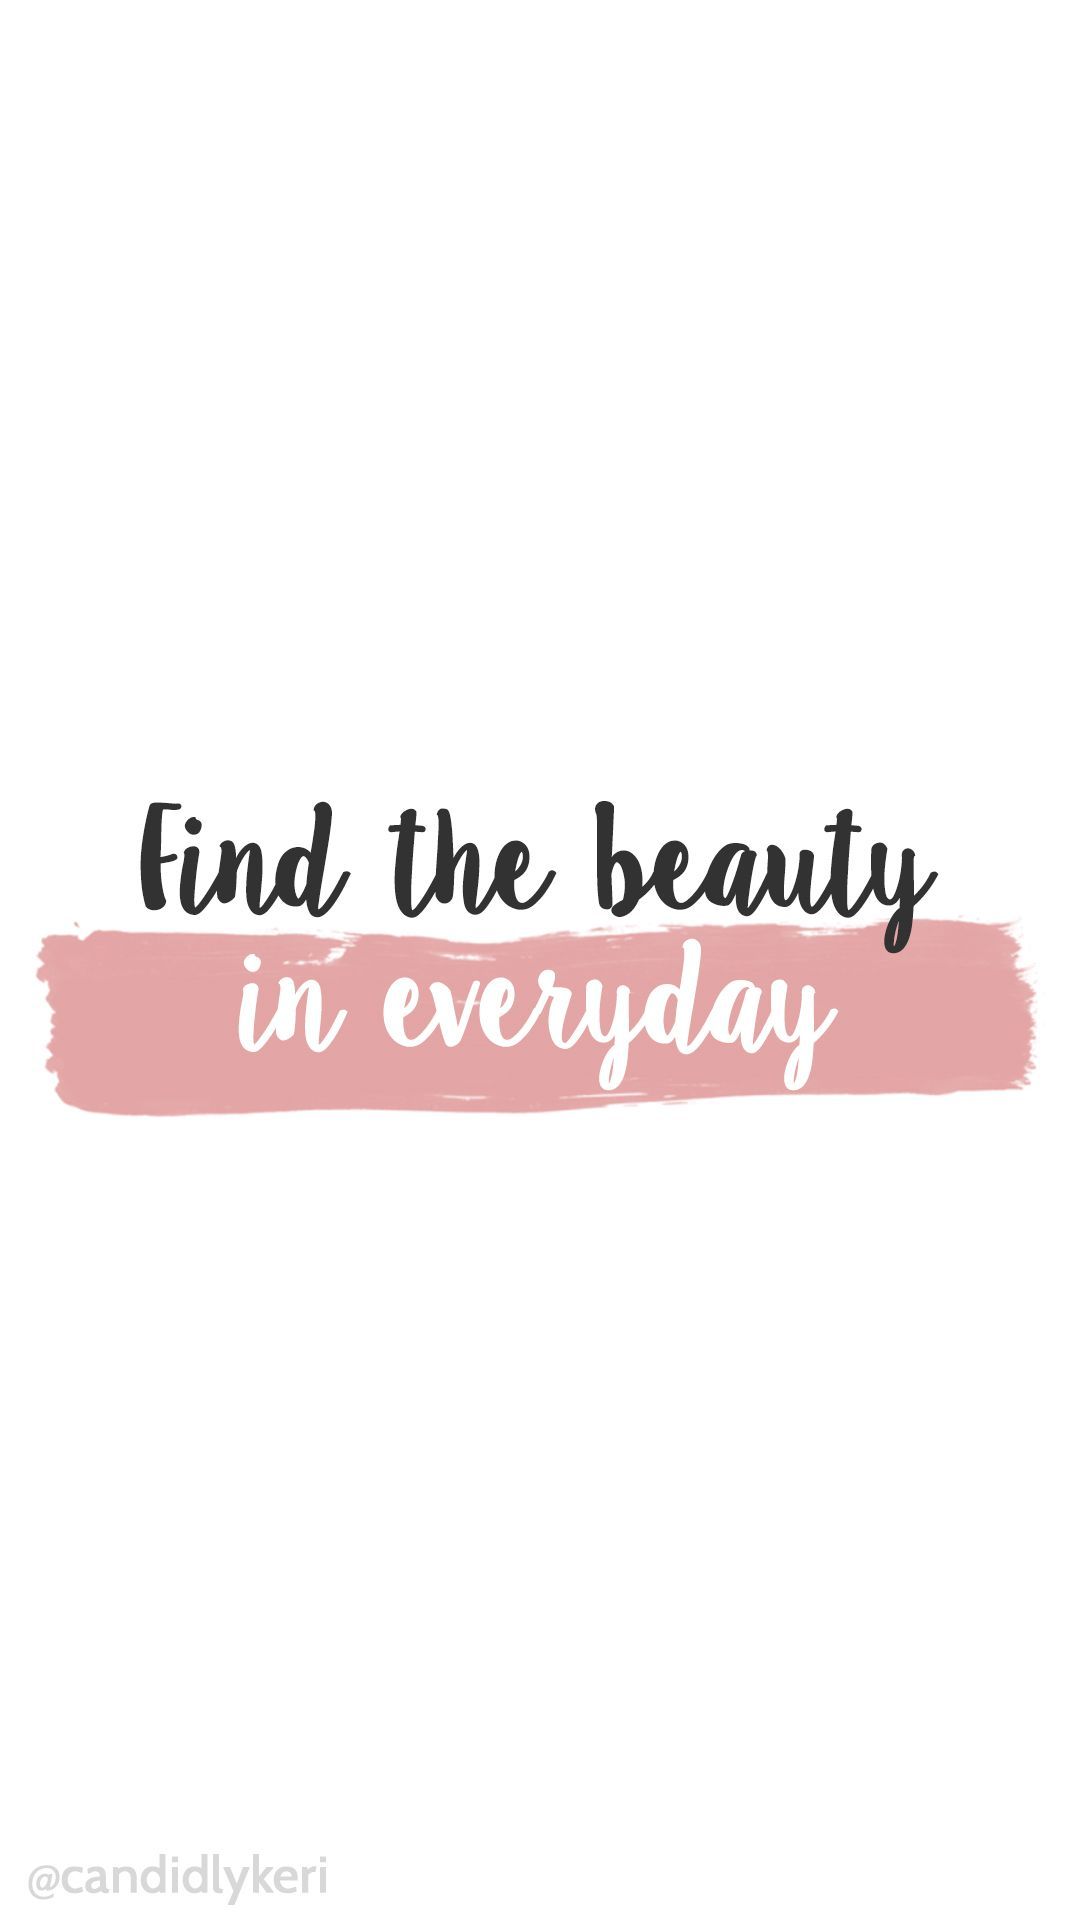 19 beauty Background quotes ideas